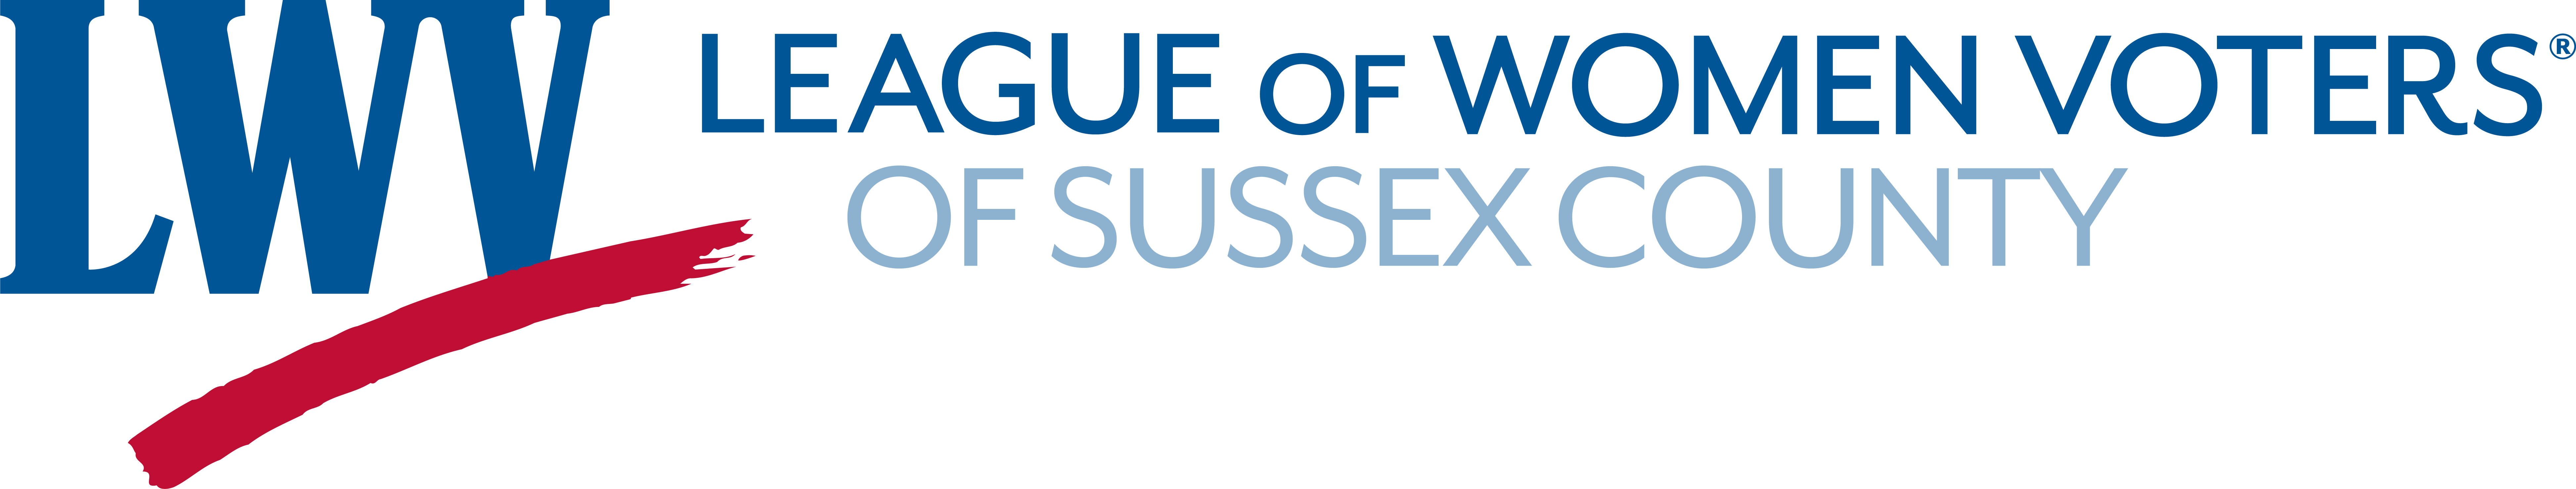 logo of the League of Women Voters of Sussex County